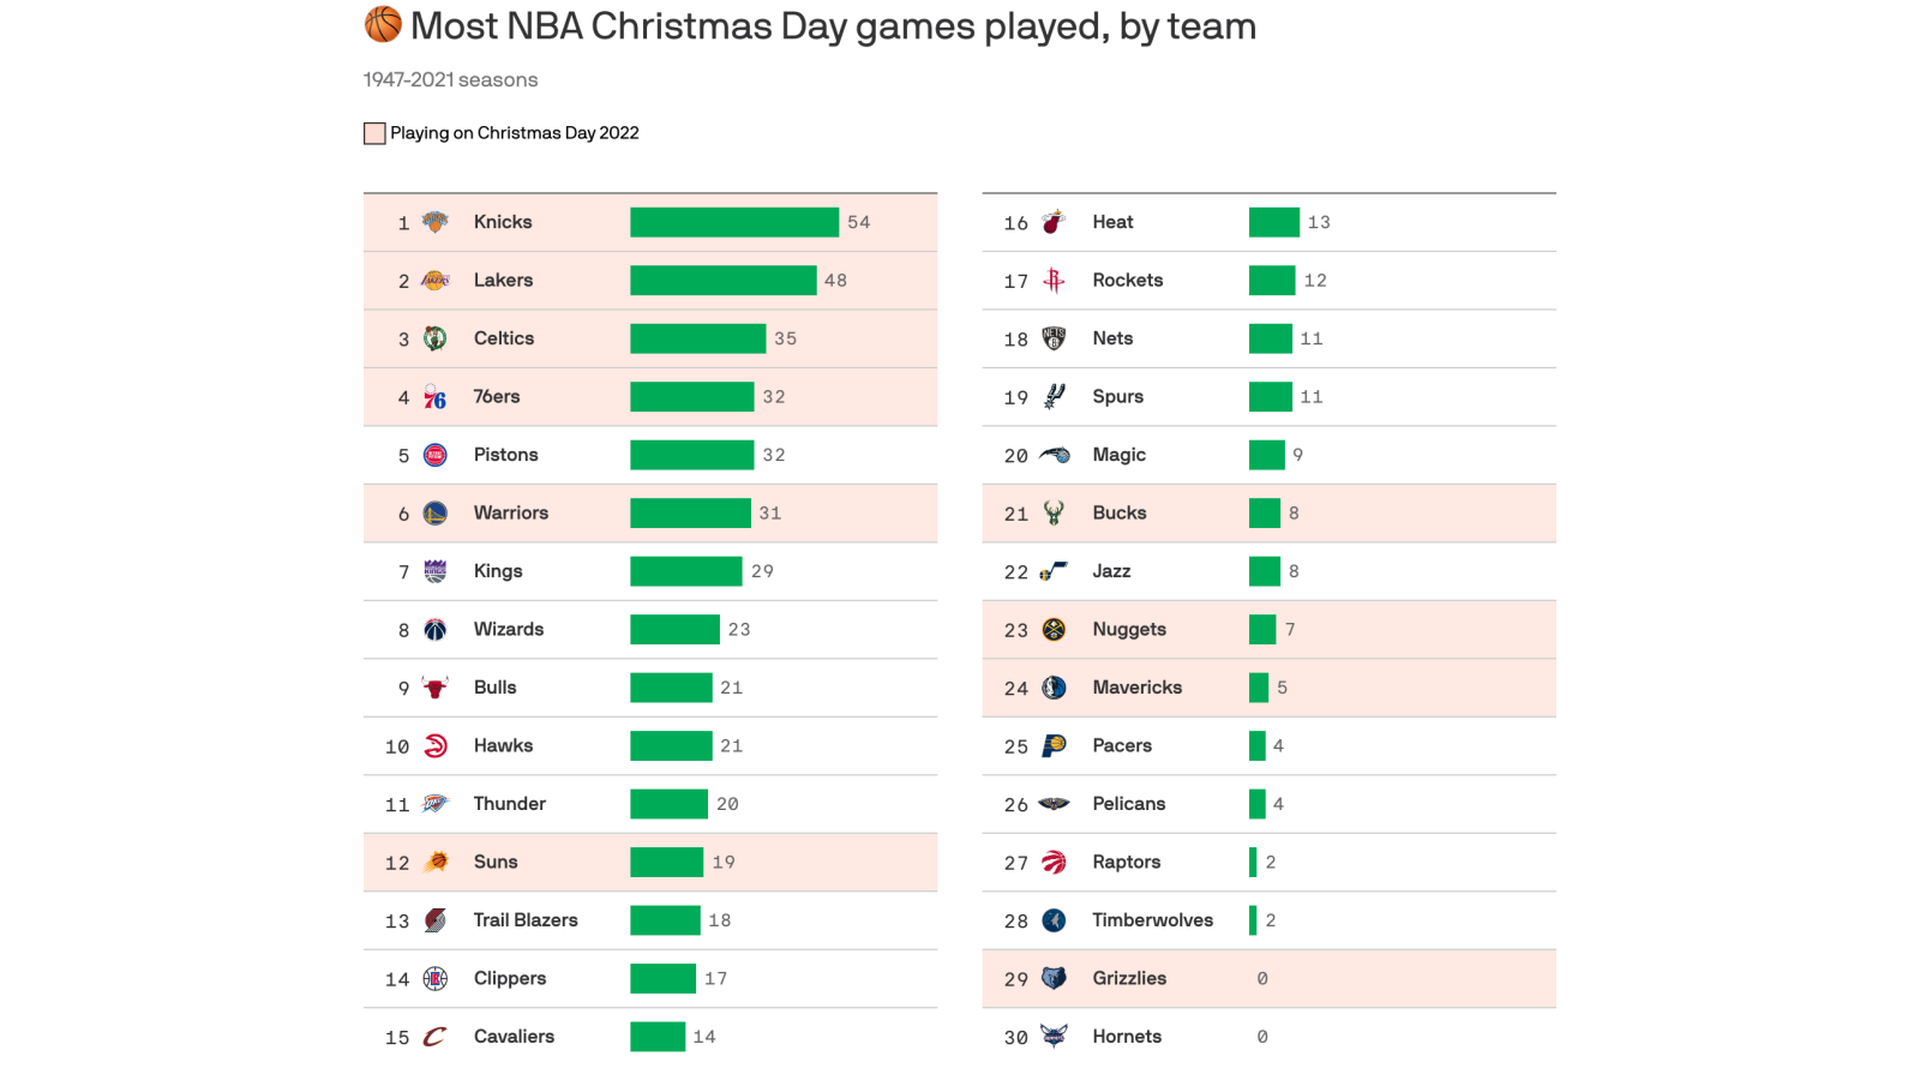 New York Knicks: Their 5 Most Memorable Christmas Day Games in NBA